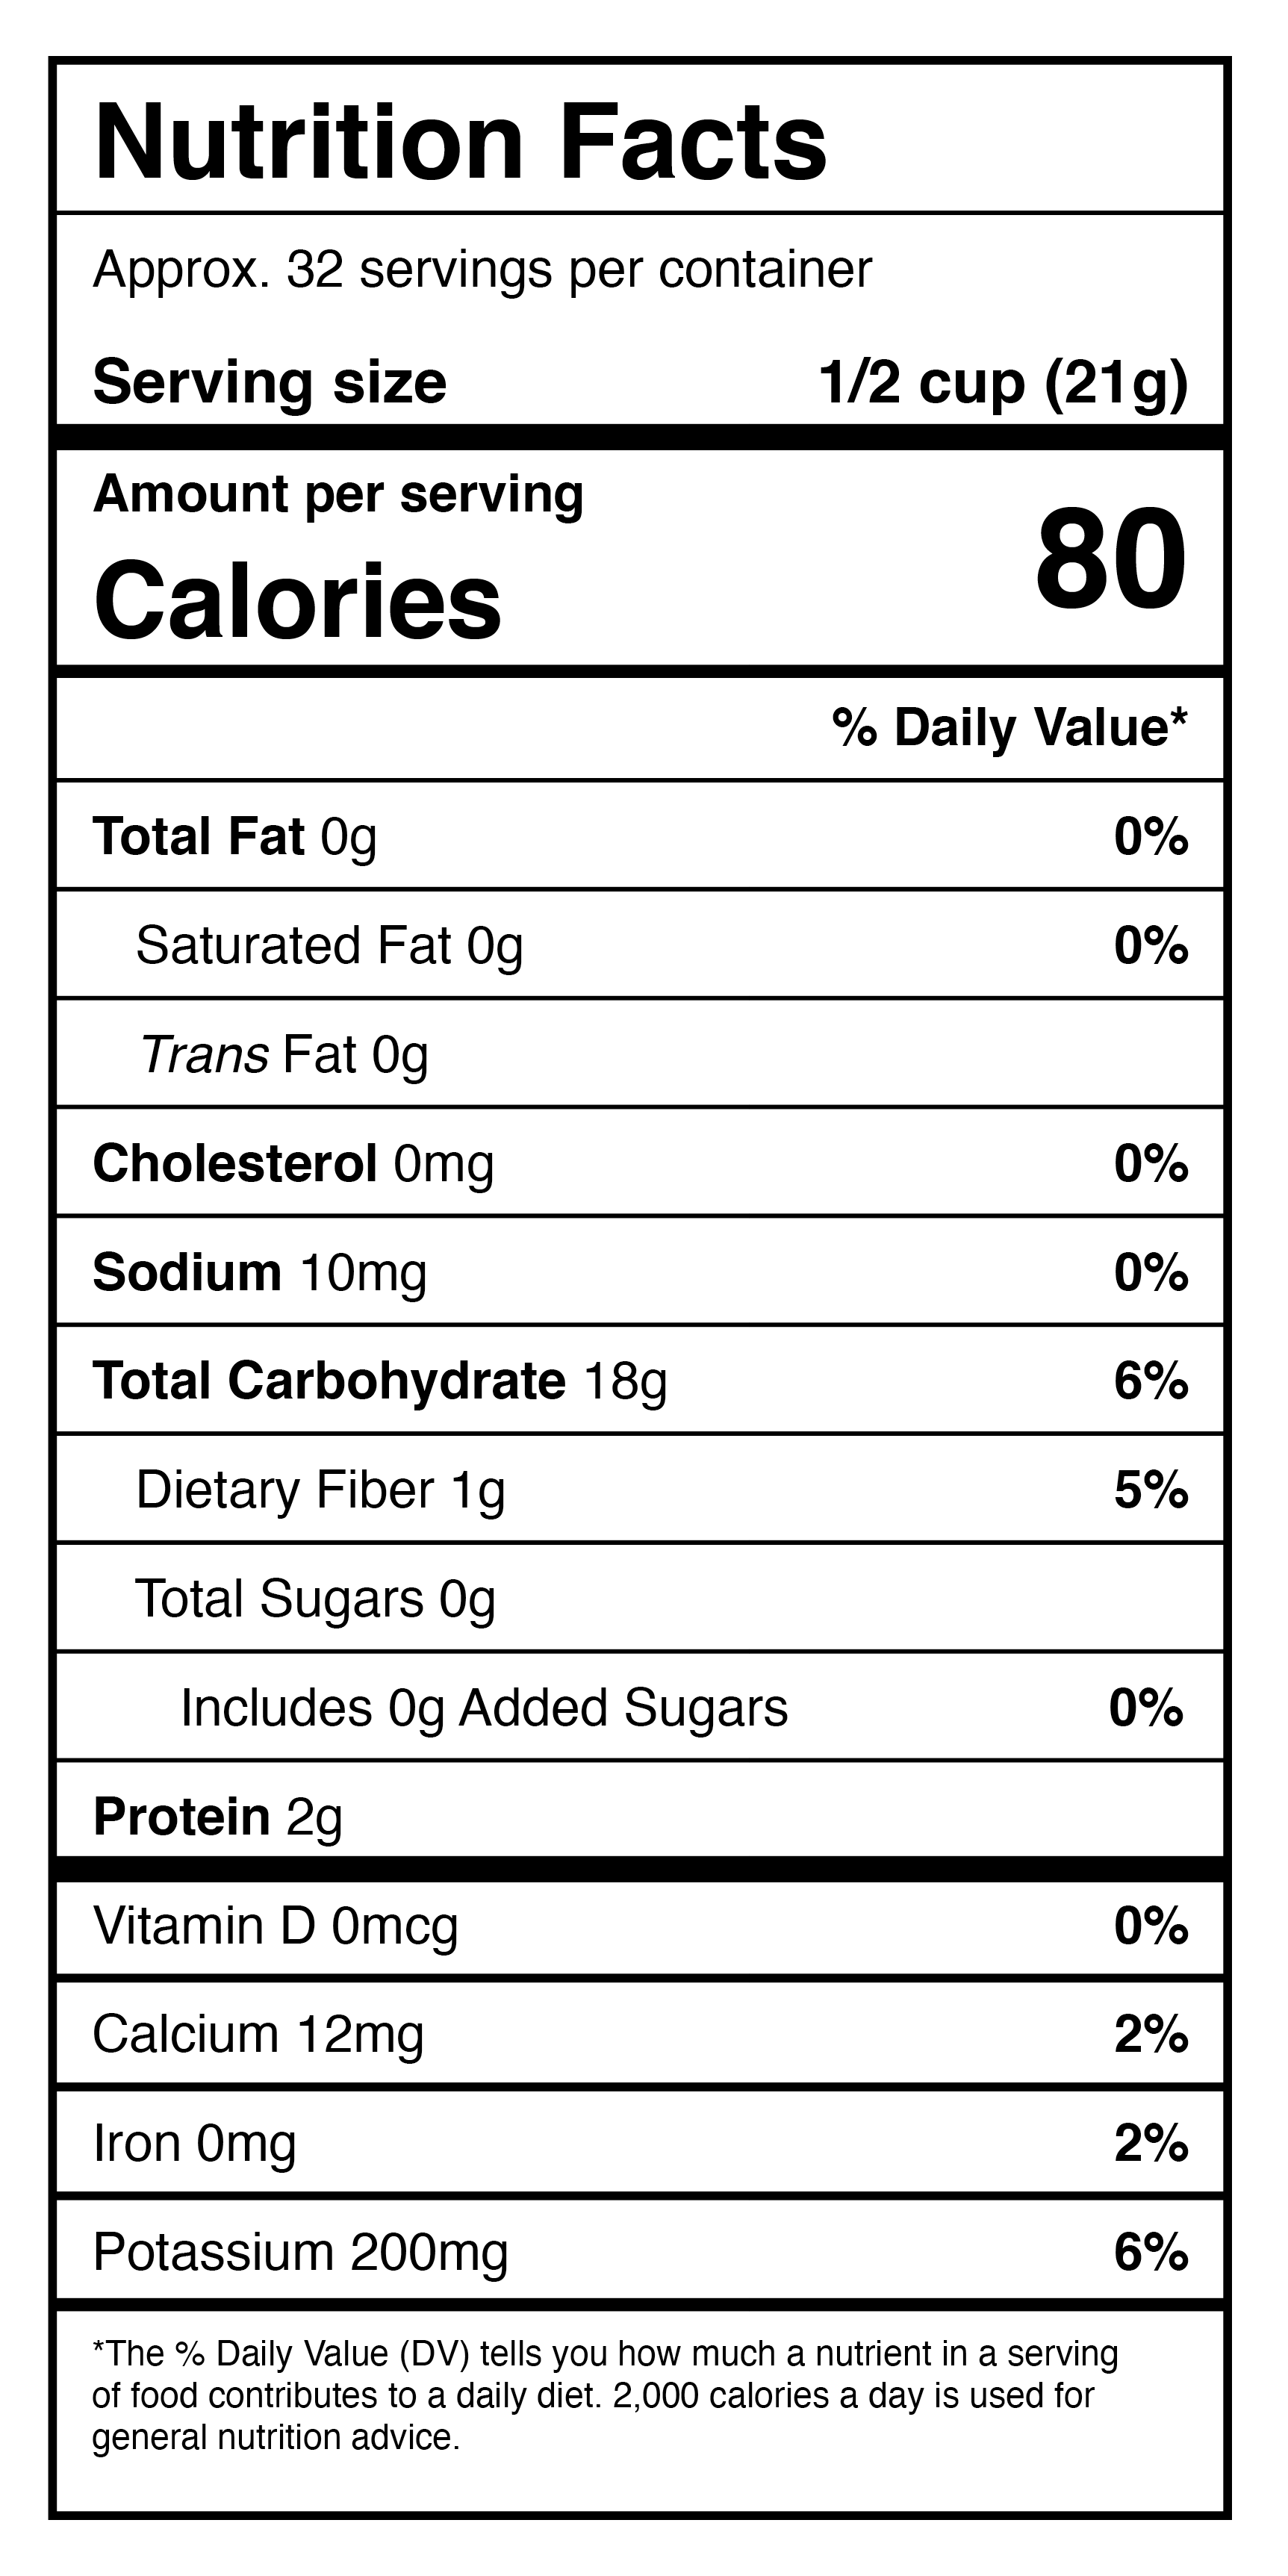 A nutrition label for a protein bar with Harmony House Dried Potatoes.